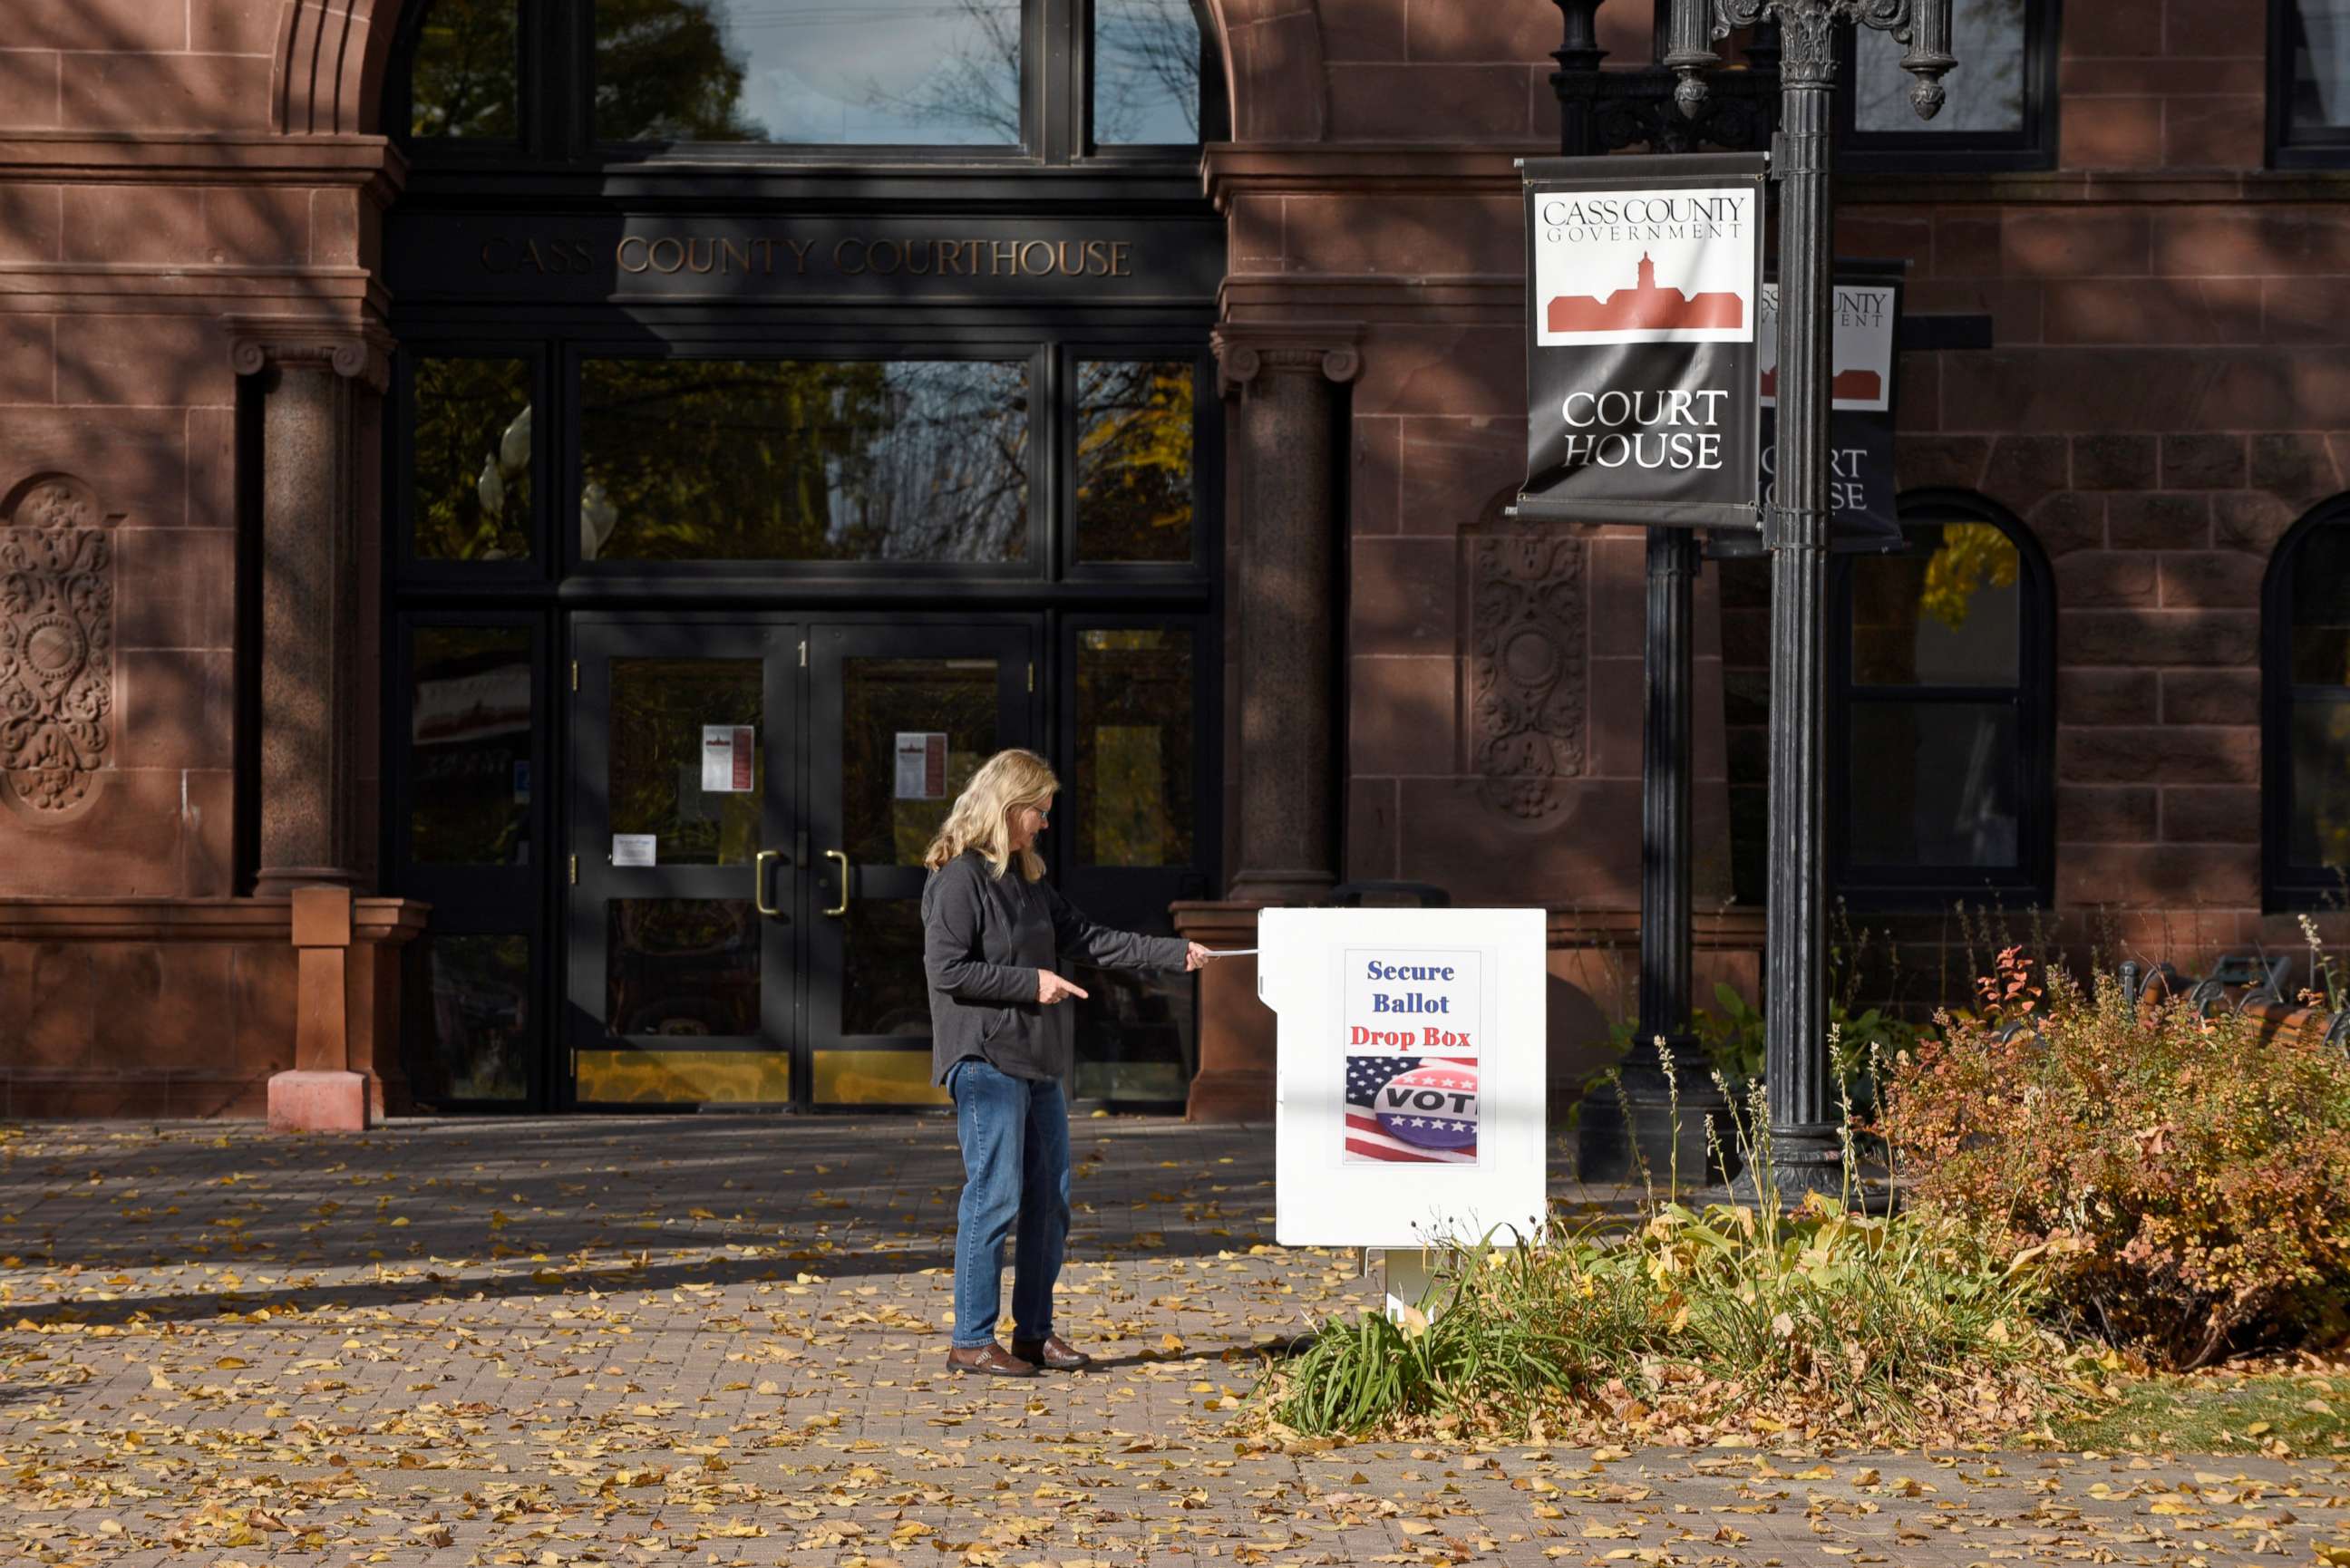 PHOTO: A voter places a ballot for the 2020 Presidential elections in a drop box outside the Cass County Courthouse in Fargo, North Dakota, Oct. 15, 2020.